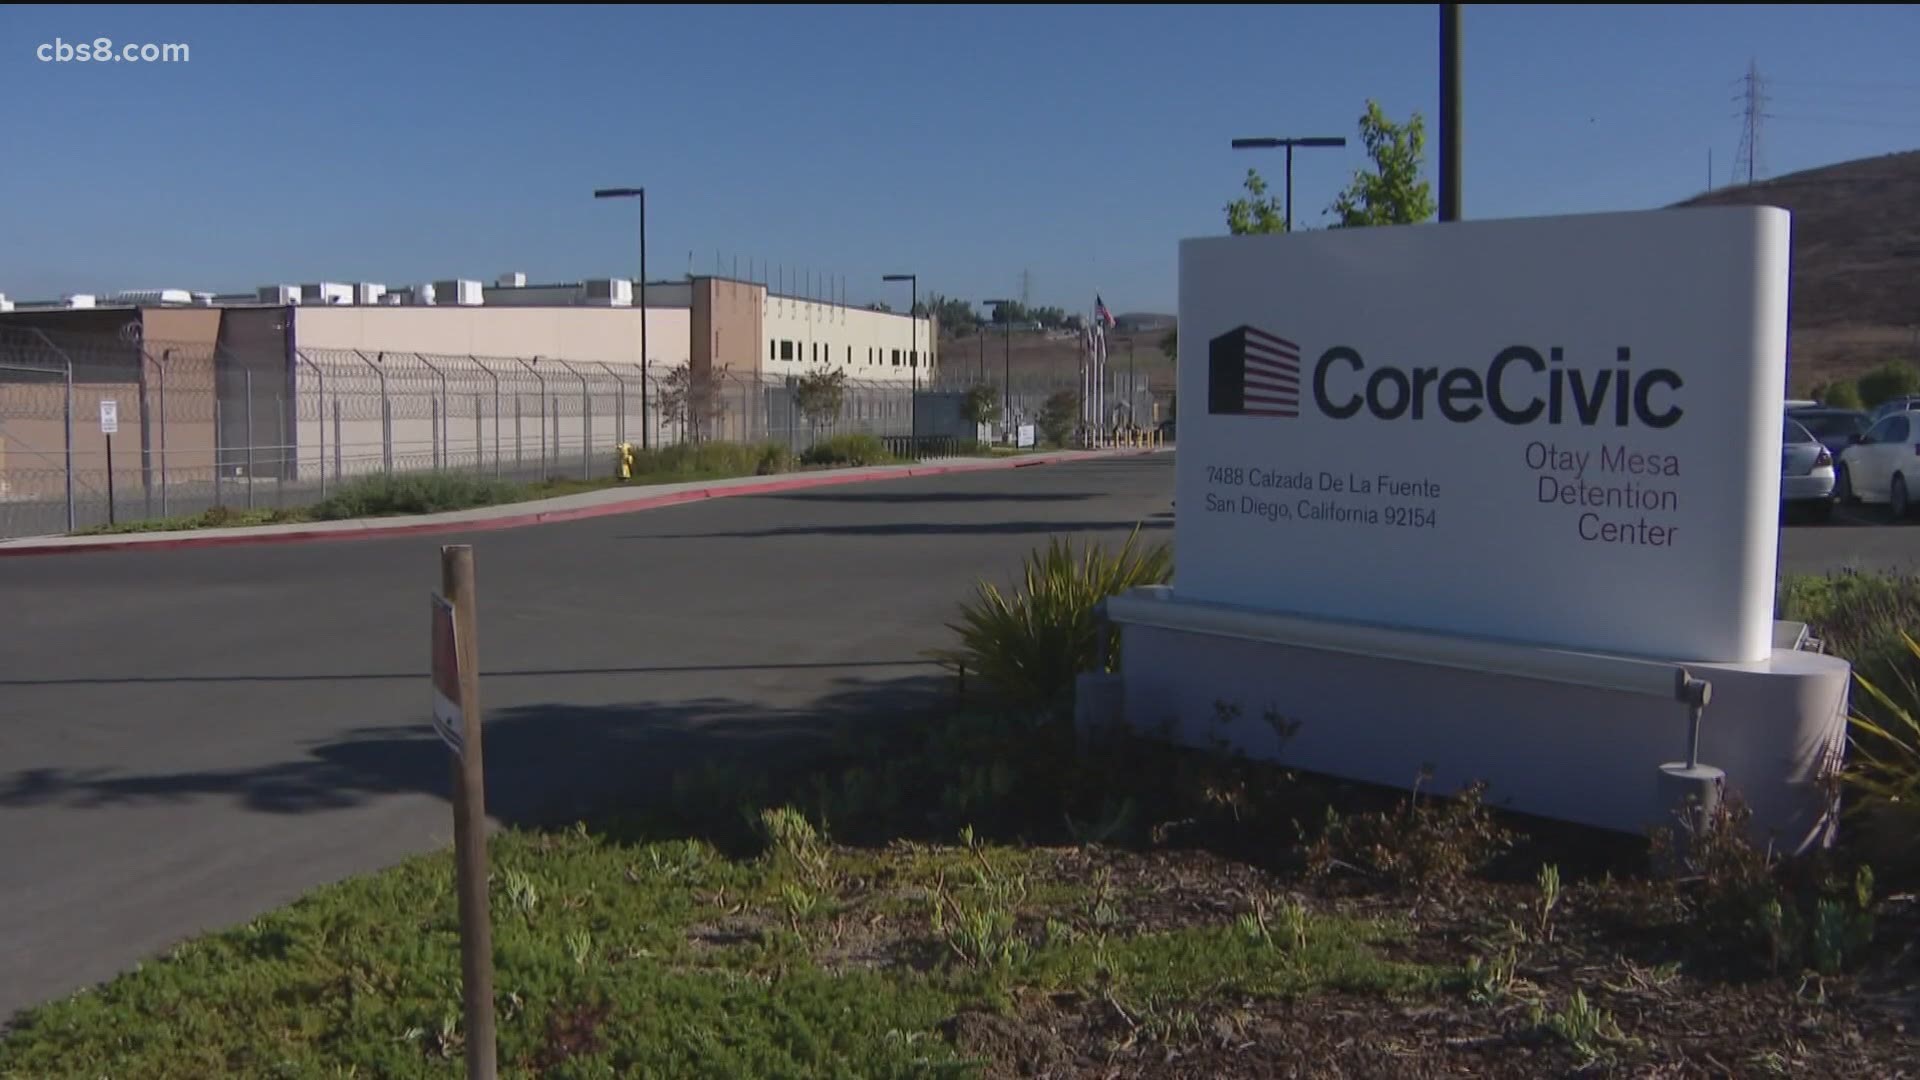 The ACLU says there have been "documented patterns of abuse, mistreatment and misconduct" at the Otay Mesa Detention Center.